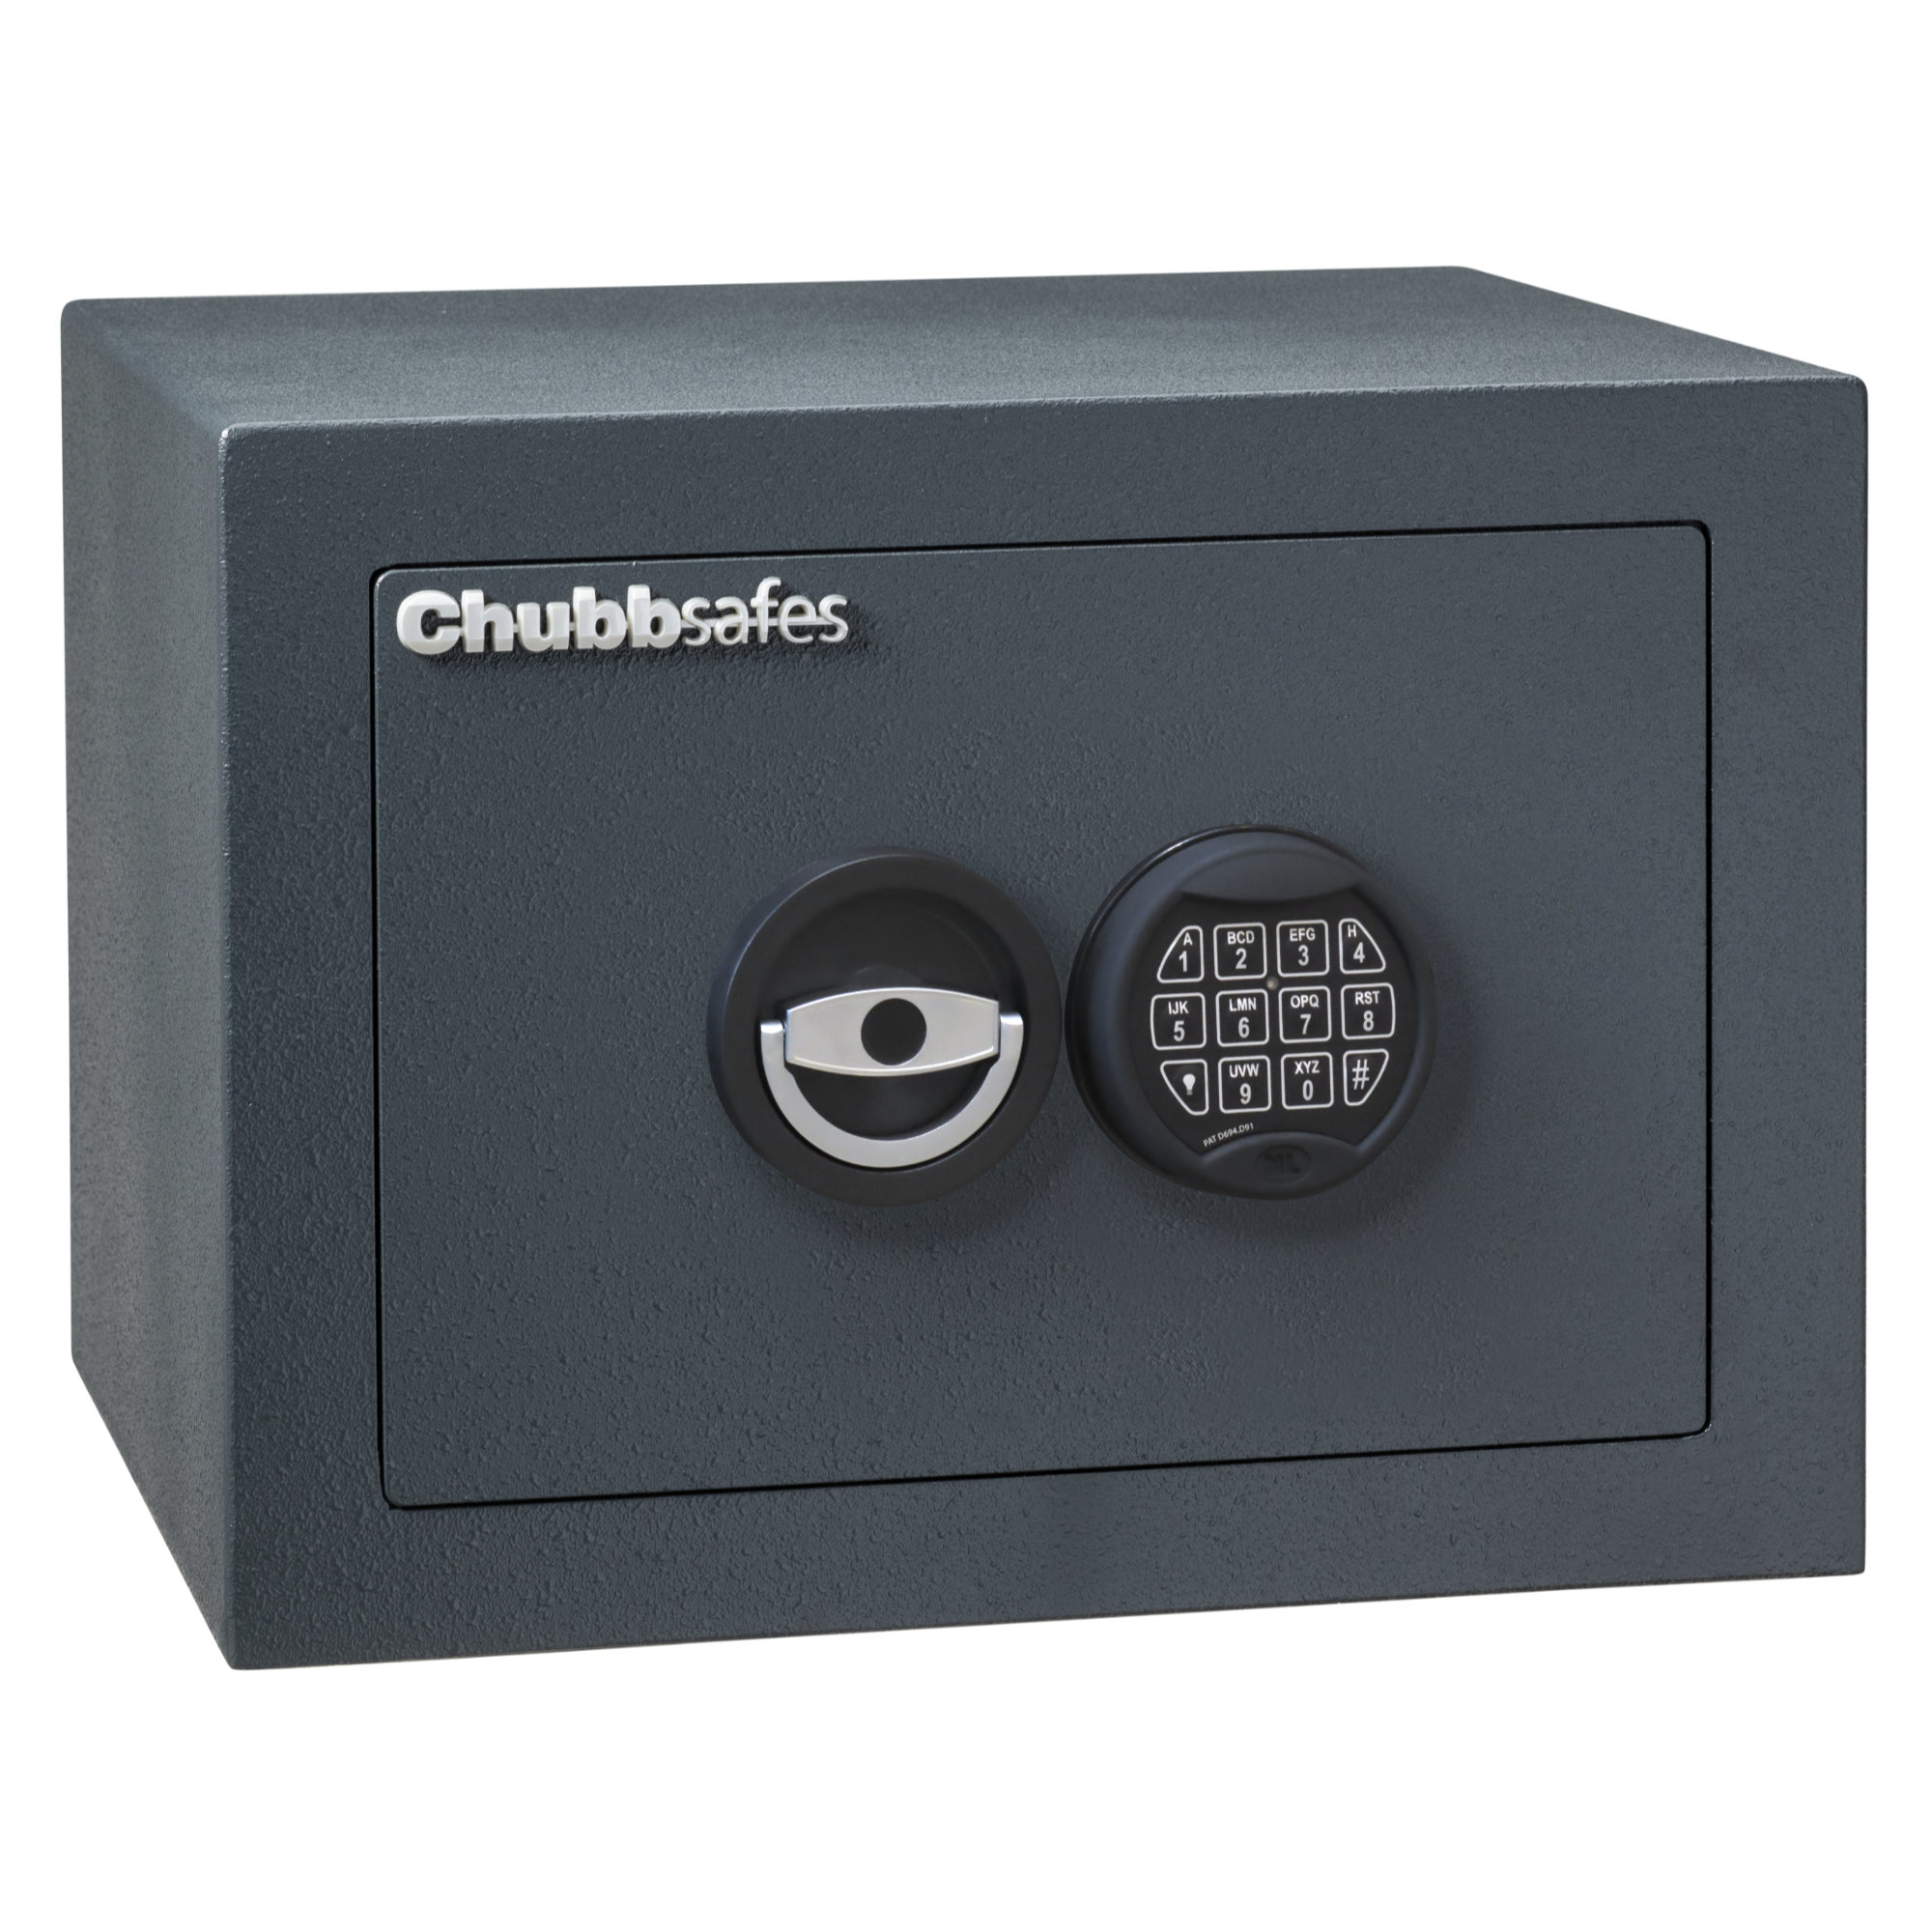 This Chubbsafes Zeta Grade 1 size 20e security safe has £10,000 rating and is secured by a quality electronic lock.